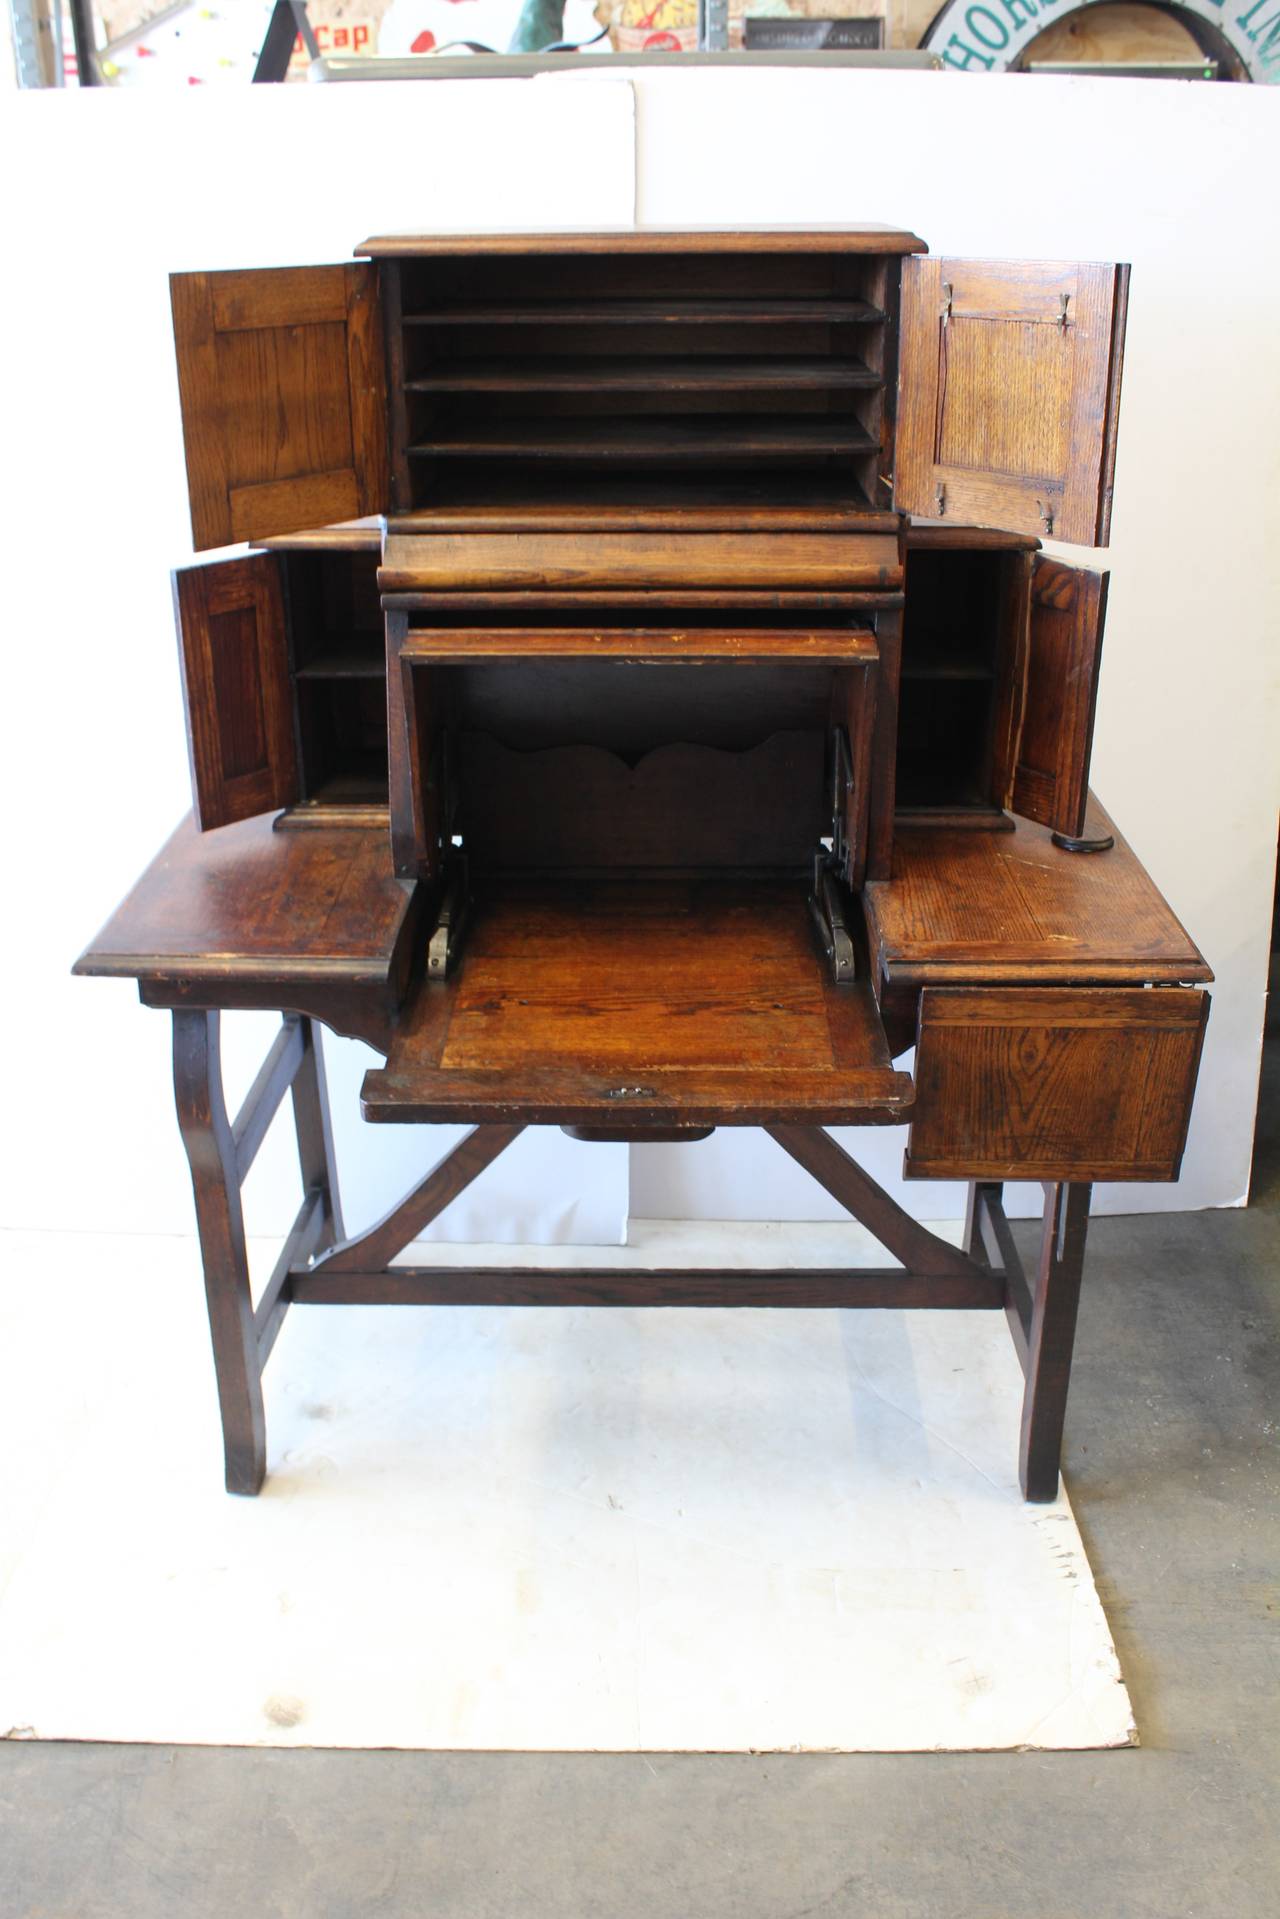 Rare antique American Industrial mechanical desk. By pulling central drawer whole desk will open. The opening H 14